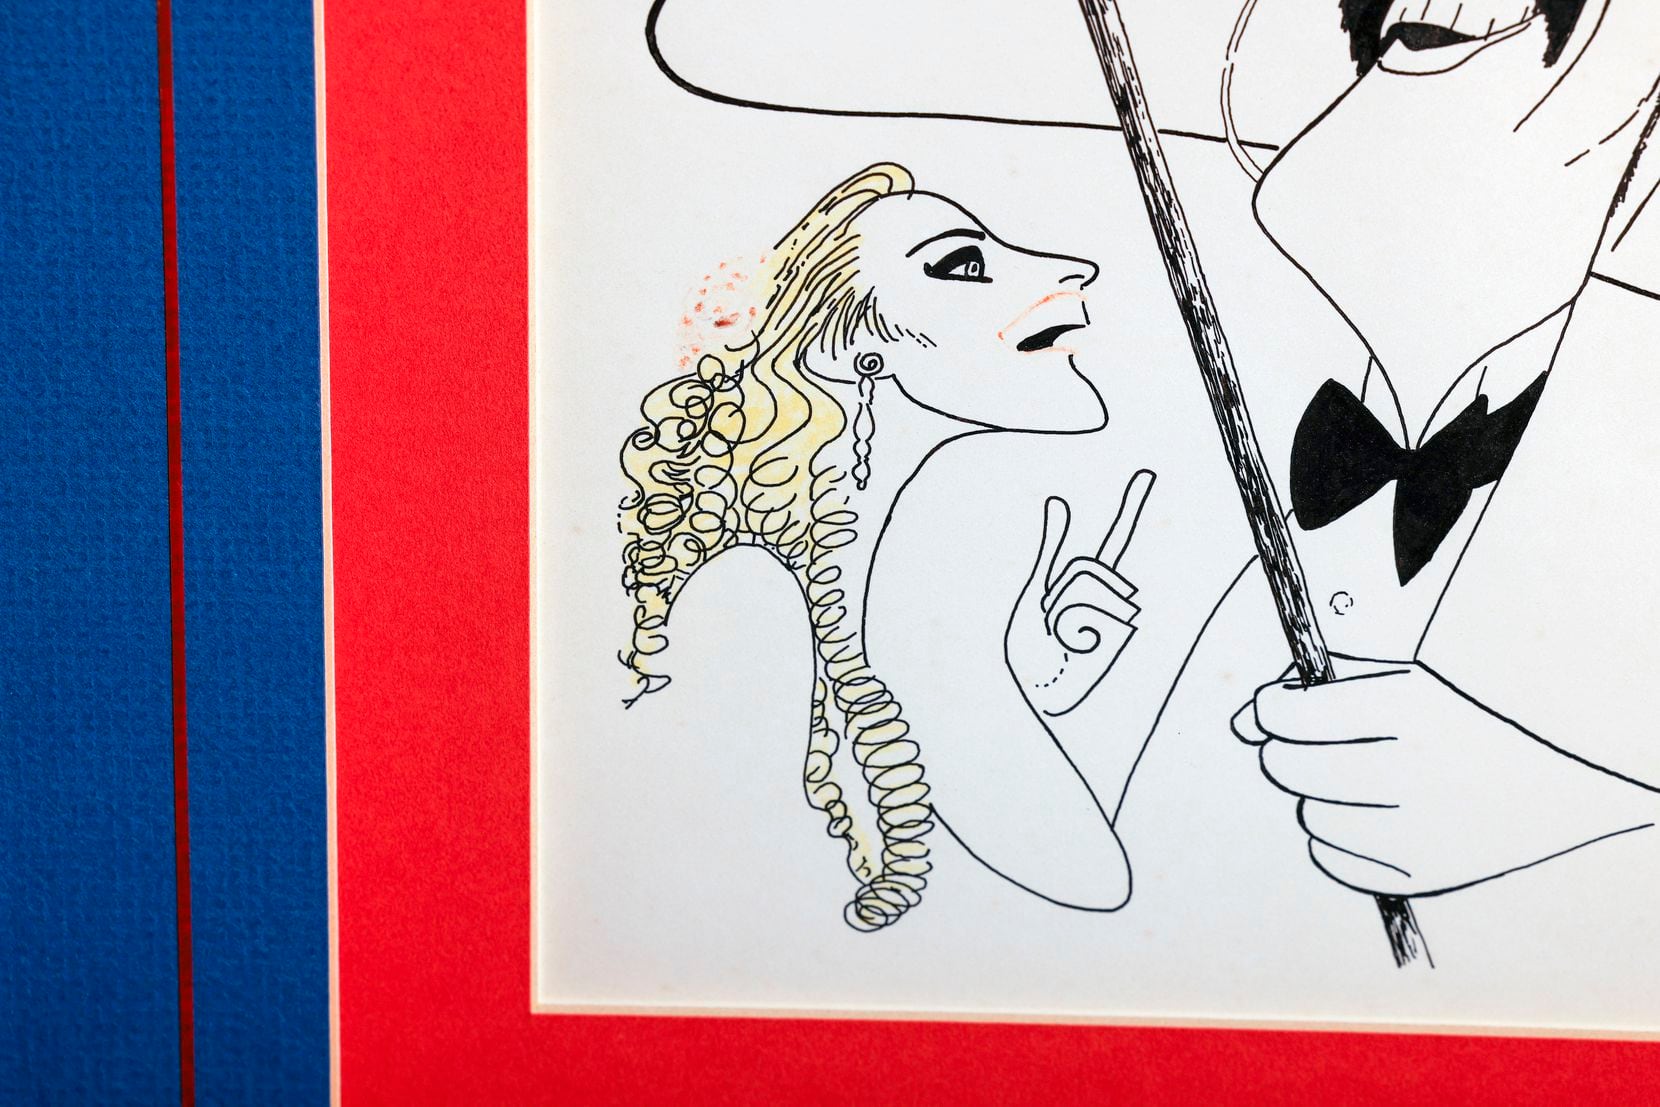 A detail view of the Al Hirschfeld drawing shows some of the image's unusual touches of color.